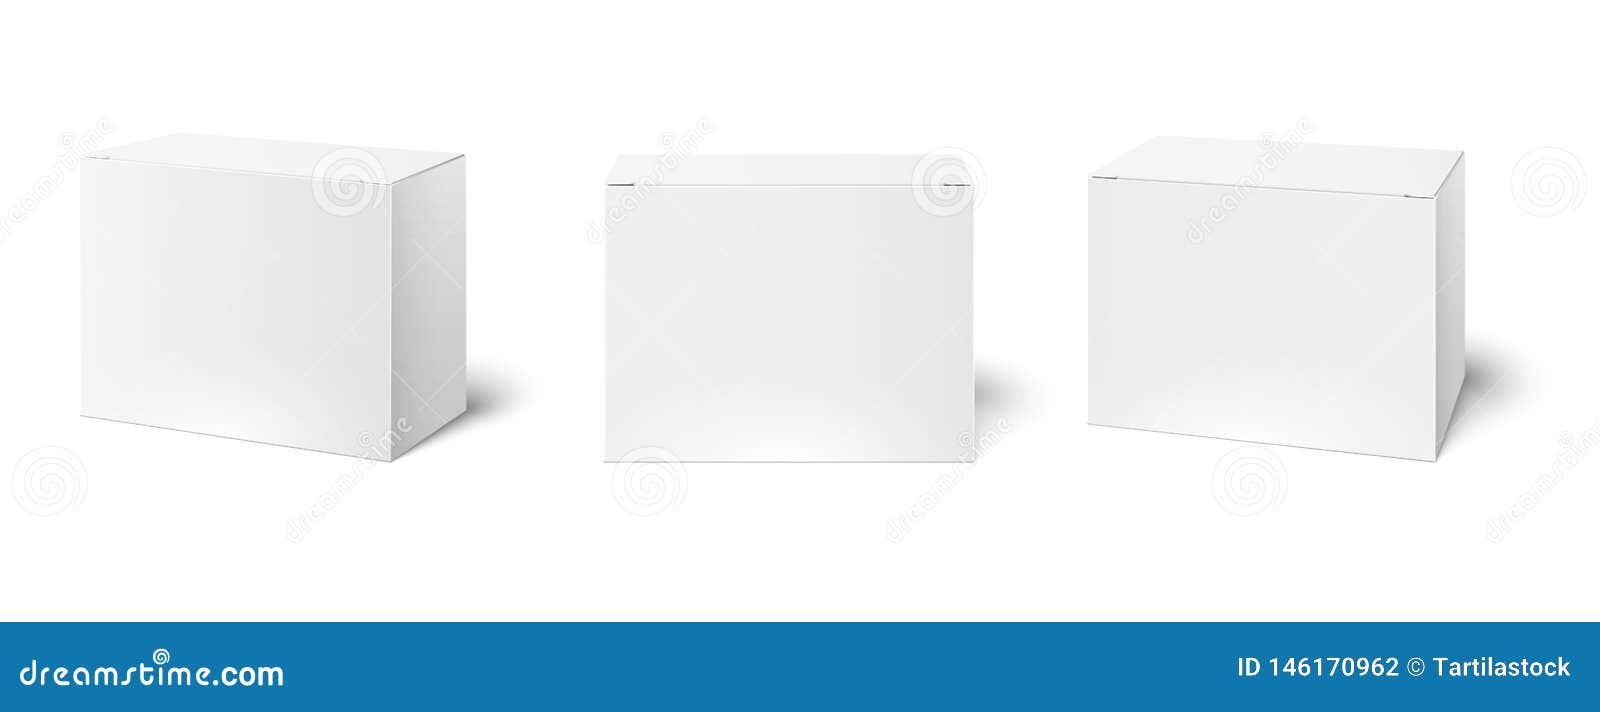 white box mockup. blank packaging boxes, cube perspective view and cosmetics product package mockups 3d 